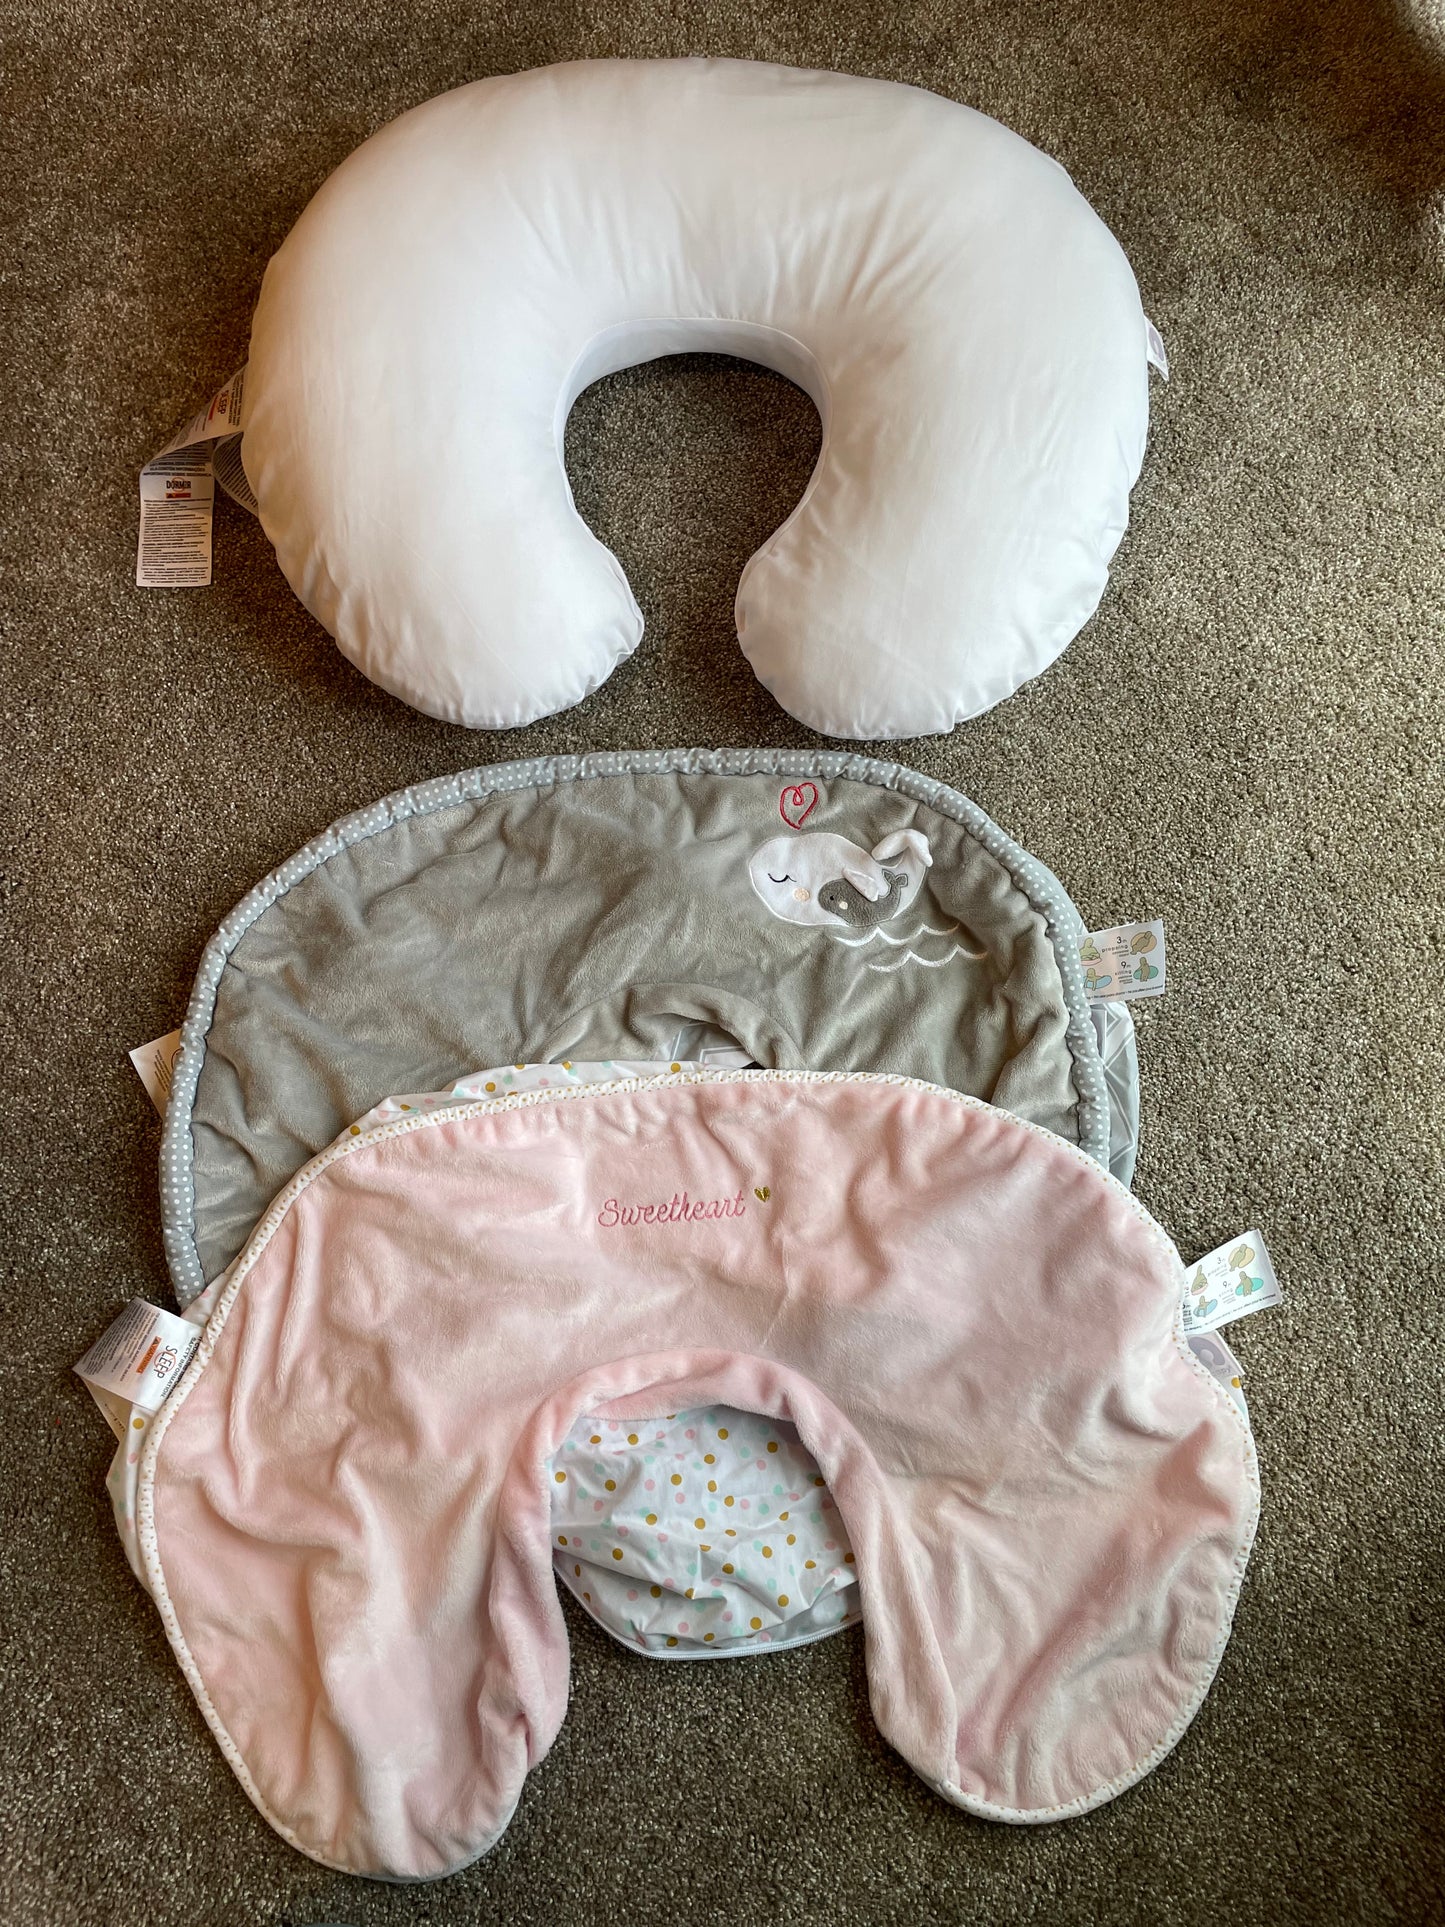 Boppy Pillow with 2 covers